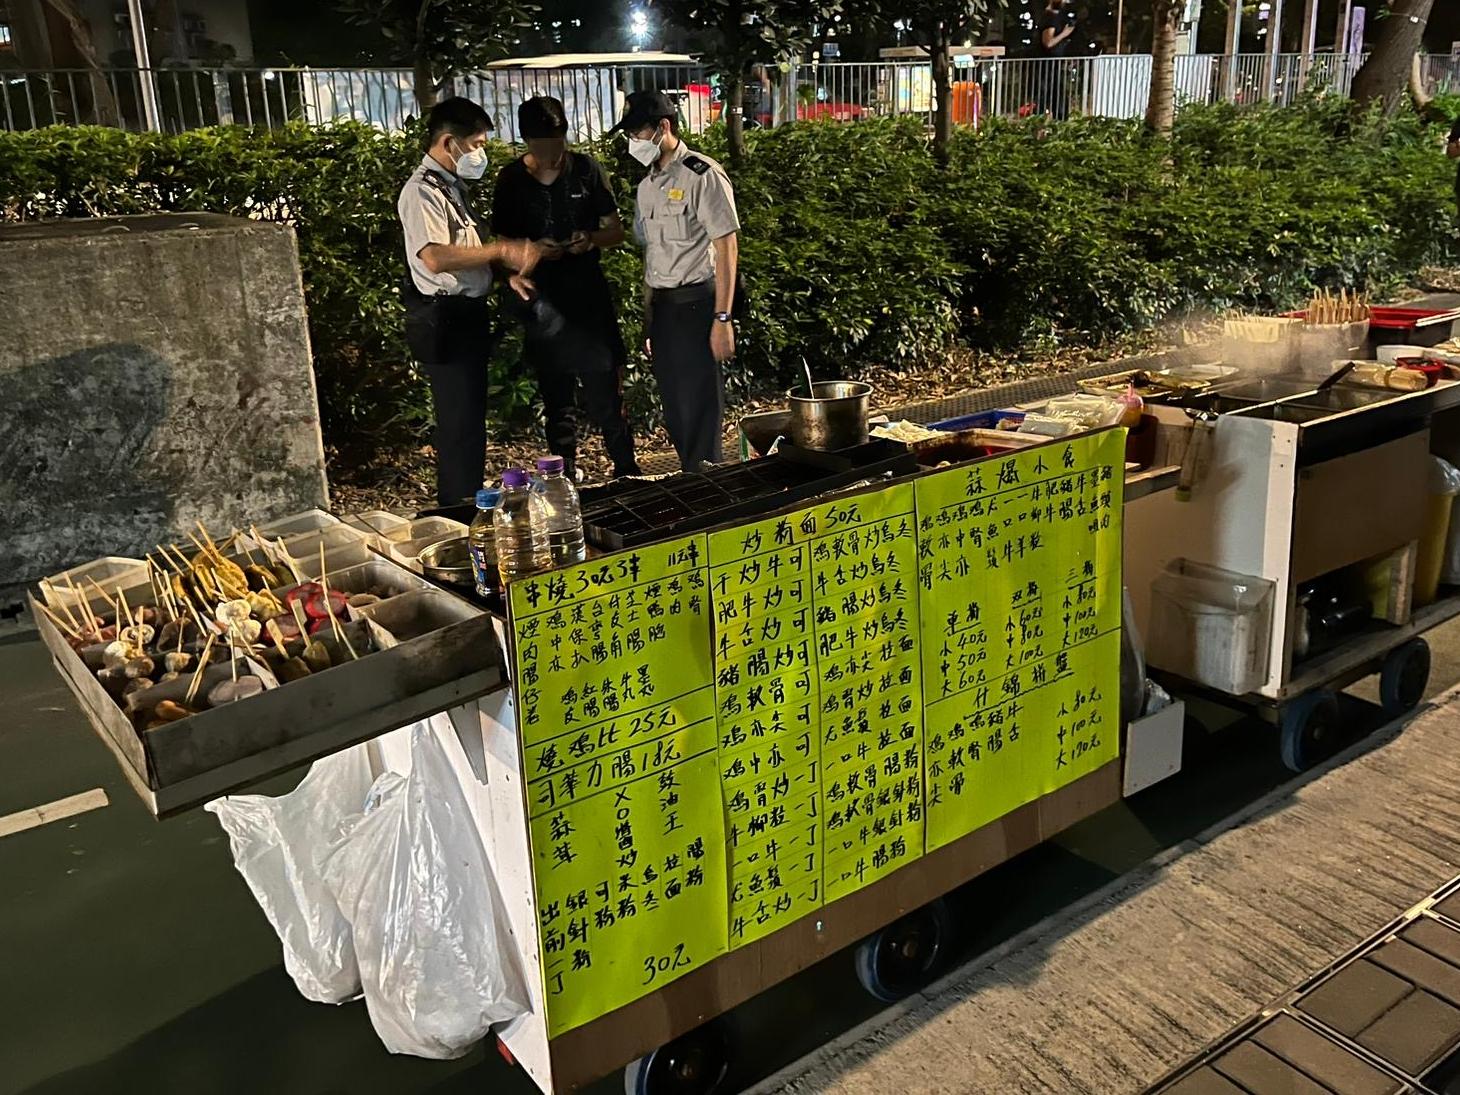 A spokesman for the Food and Environmental Hygiene Department (FEHD) said today (April 18) that to enhance evidence collection efficiency and minimise safety risks to passers-by and law enforcement officers, the FEHD conducted a pilot enforcement operation codenamed "Nighthawk" against suspected organised unlicensed cooked food hawking activities in the area of Choi Yuen Road near Po Shek Wu Estate Ancillary Facilities Block in Sheung Shui last night (April 17). Officers used video recording devices to document illegal acts and gather information on unlicensed cooked food hawkers there as evidence.